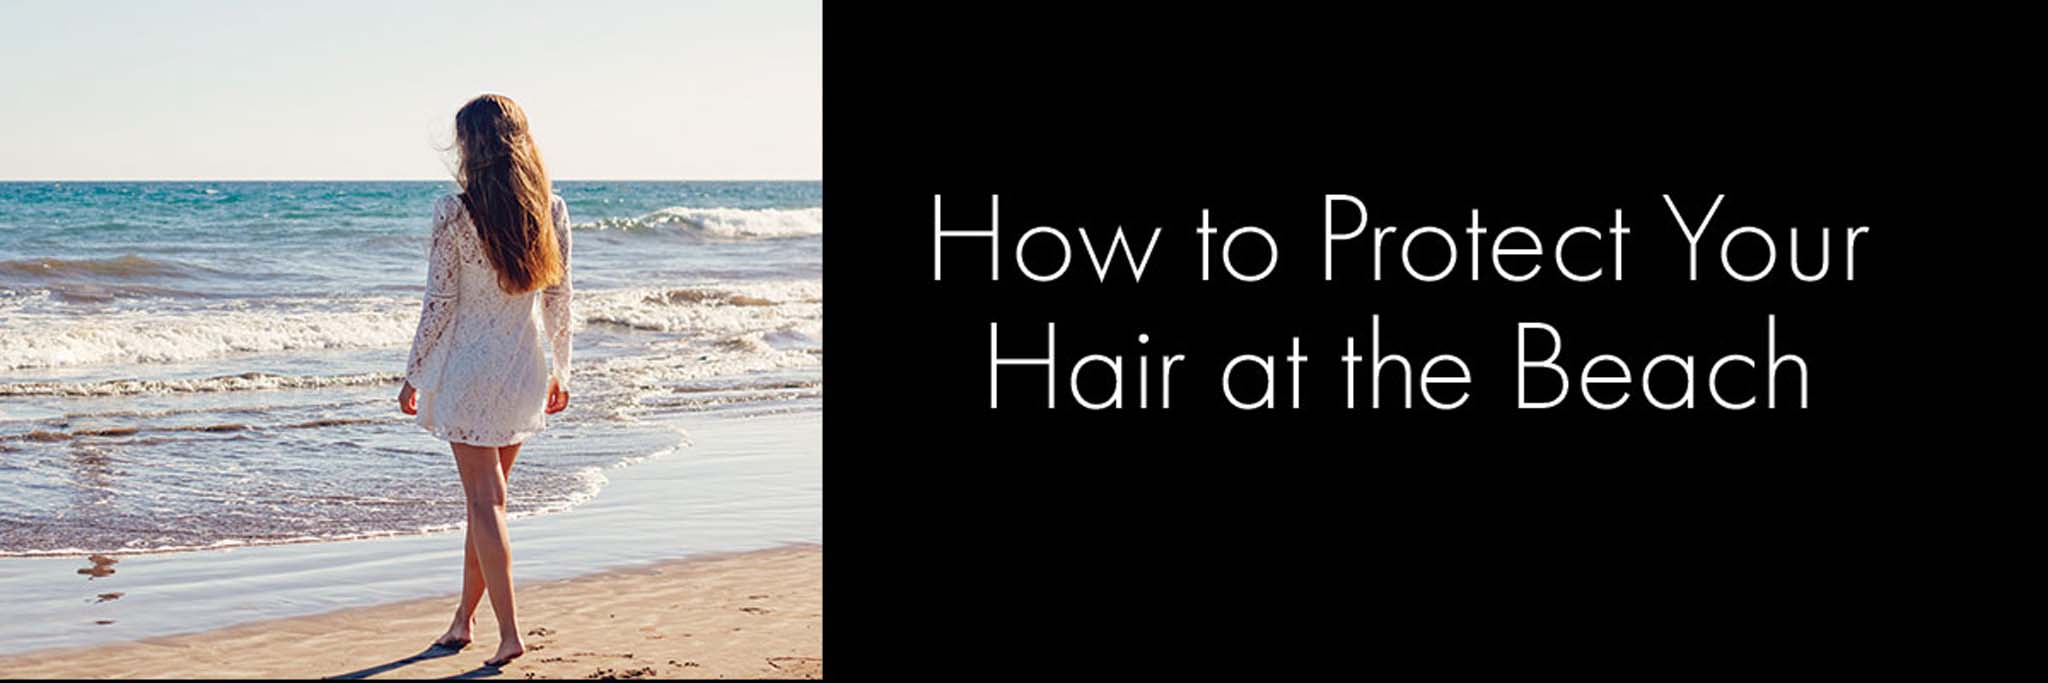 how to protect your hair at the beach